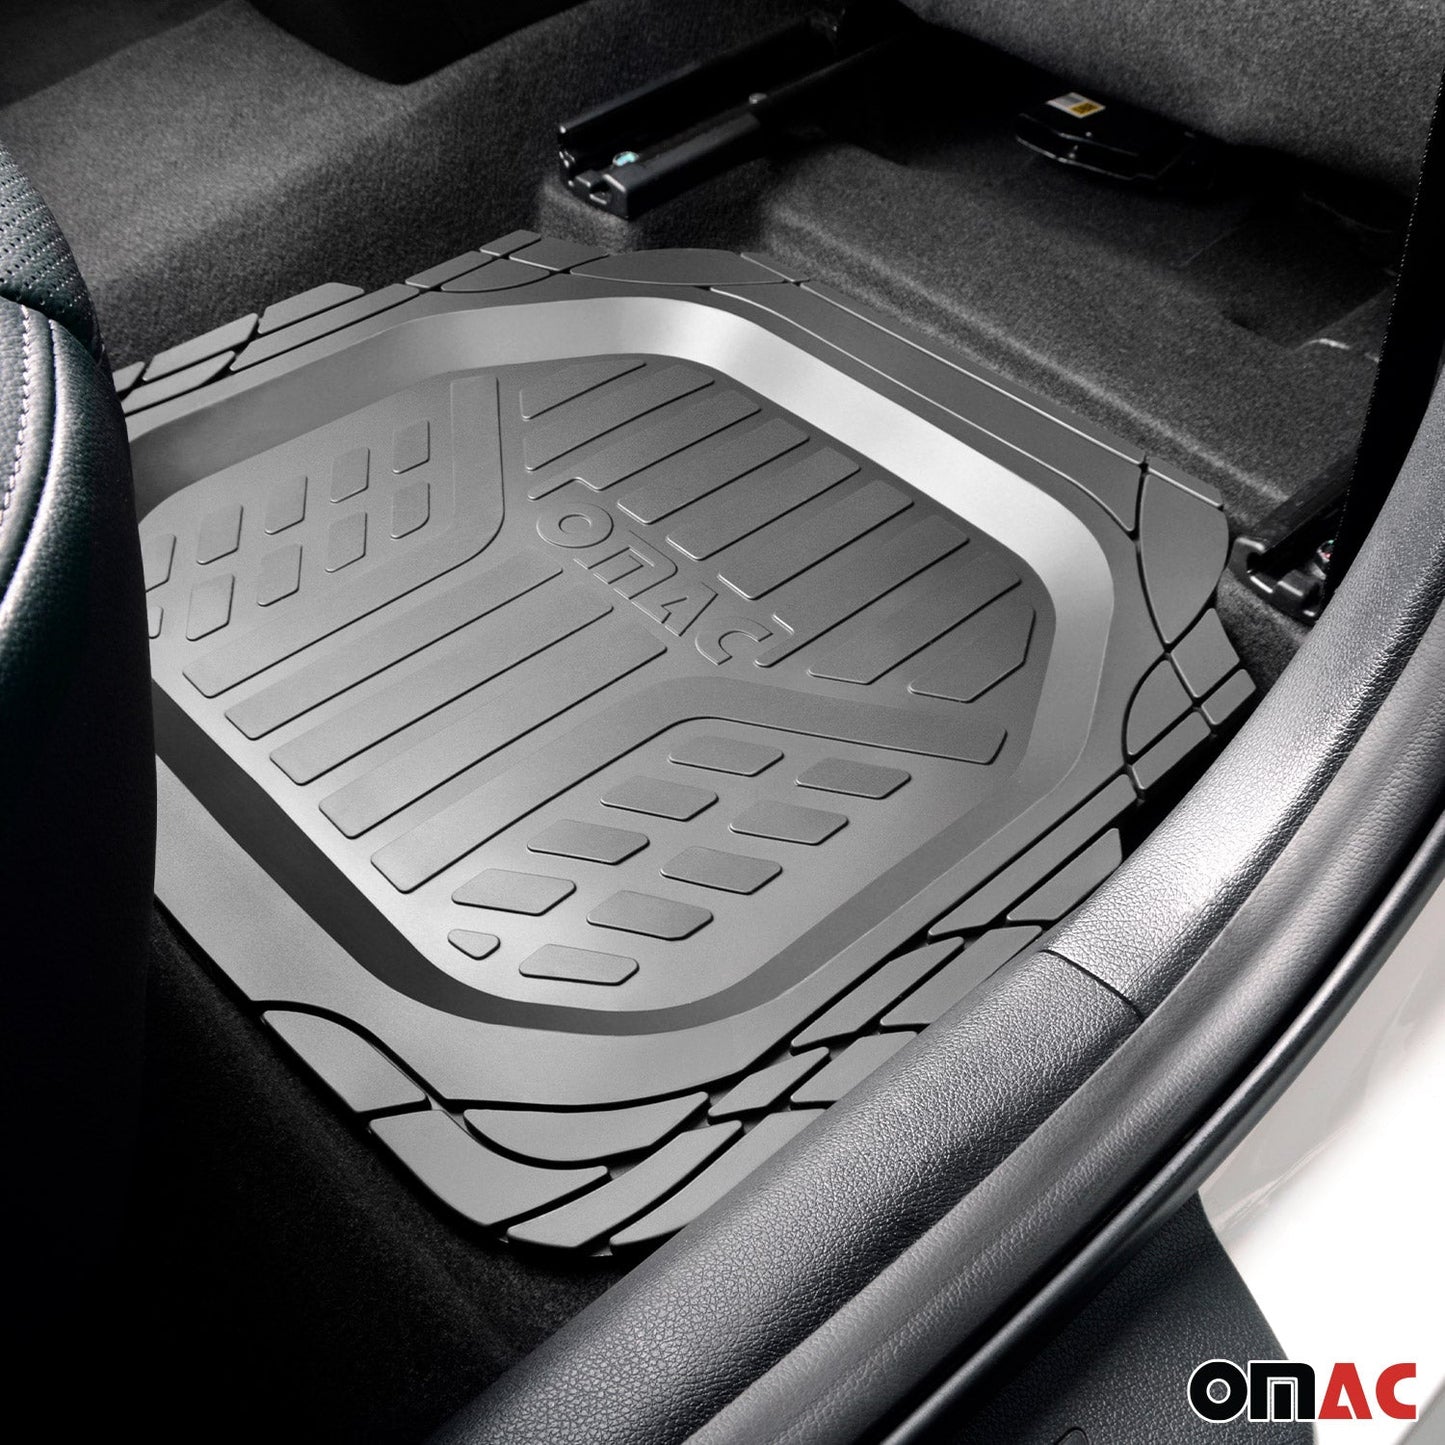 OMAC Trimmable Floor Mats Liner for Mercedes B Class W246 2012-2019 Rubber Black 4x A058339